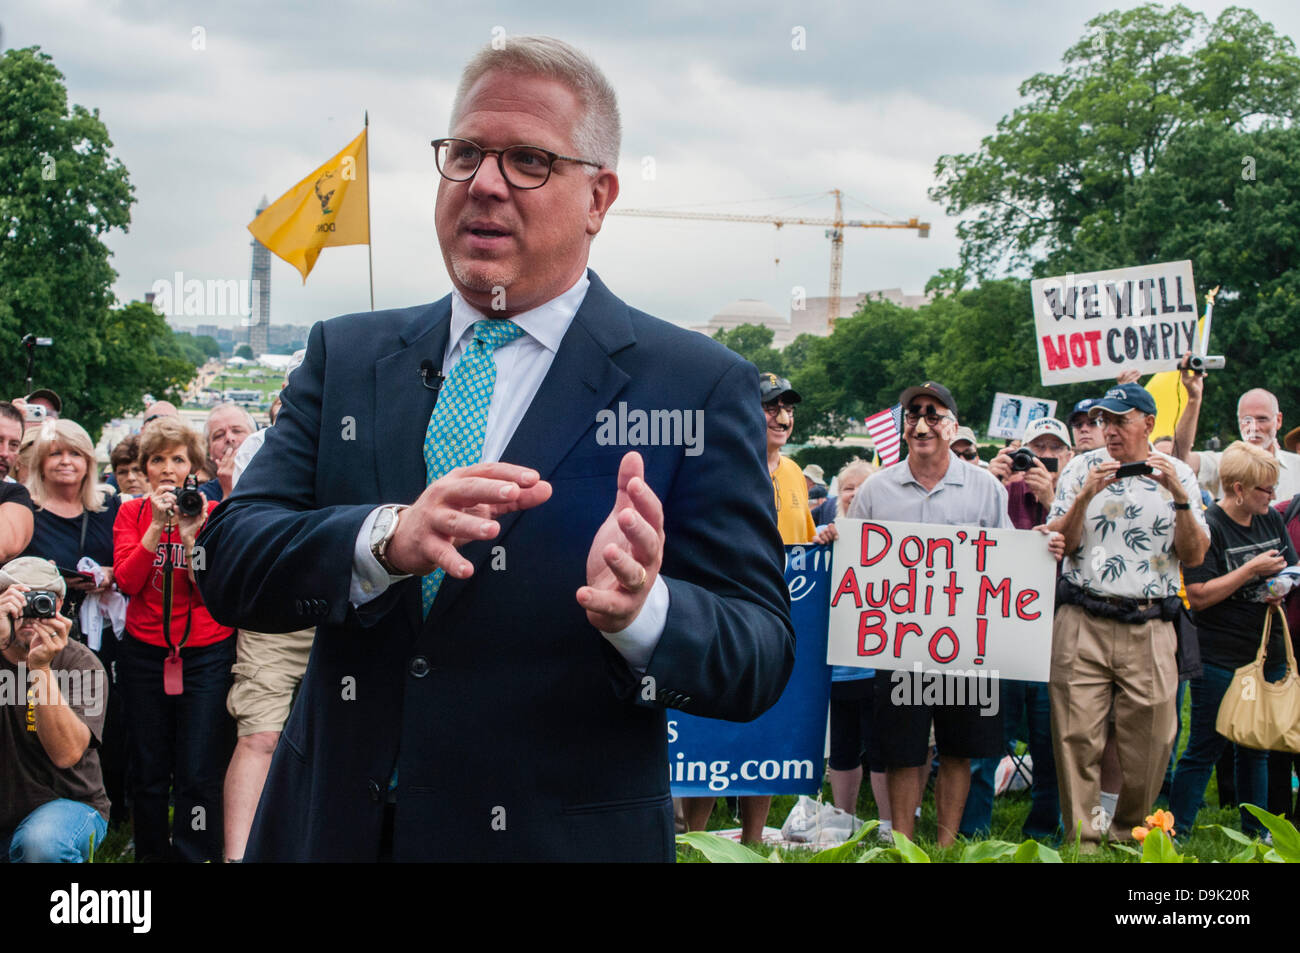 Washington DC, USA. 19th June, 2013. Tea Party Patriots Anti-IRS & Anti Illegal Immigration demonstration on Capitol mall, Washington, DC  Major speakers included Glenn Beck, Rand Paul and Michelle Bachman.  Crowd estimate between 10,000 - 15,000. Stock Photo